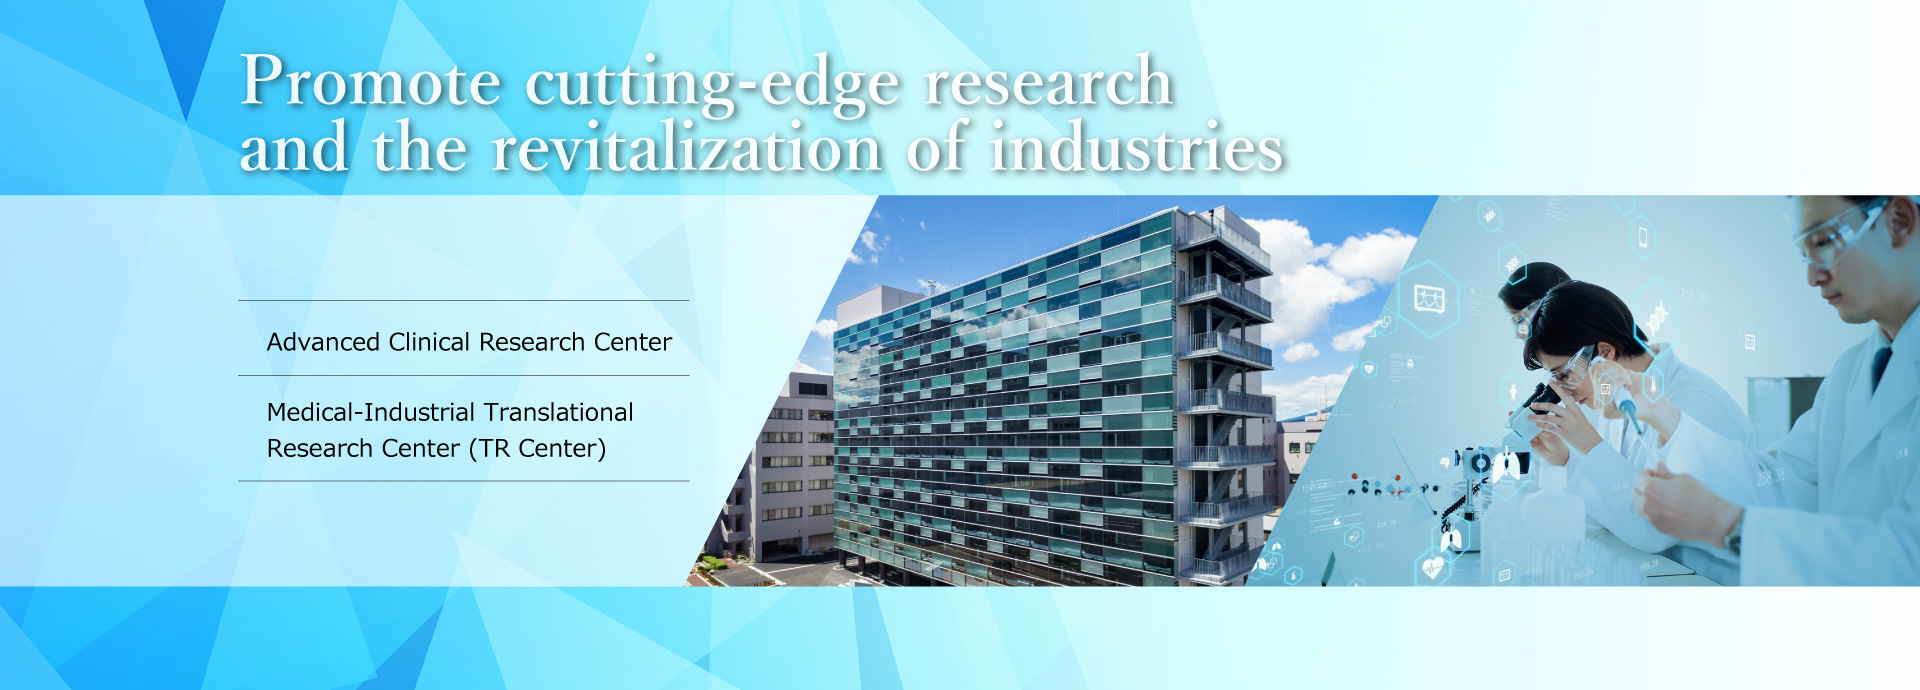 Promote cutting-edge research and the revitalization of industries